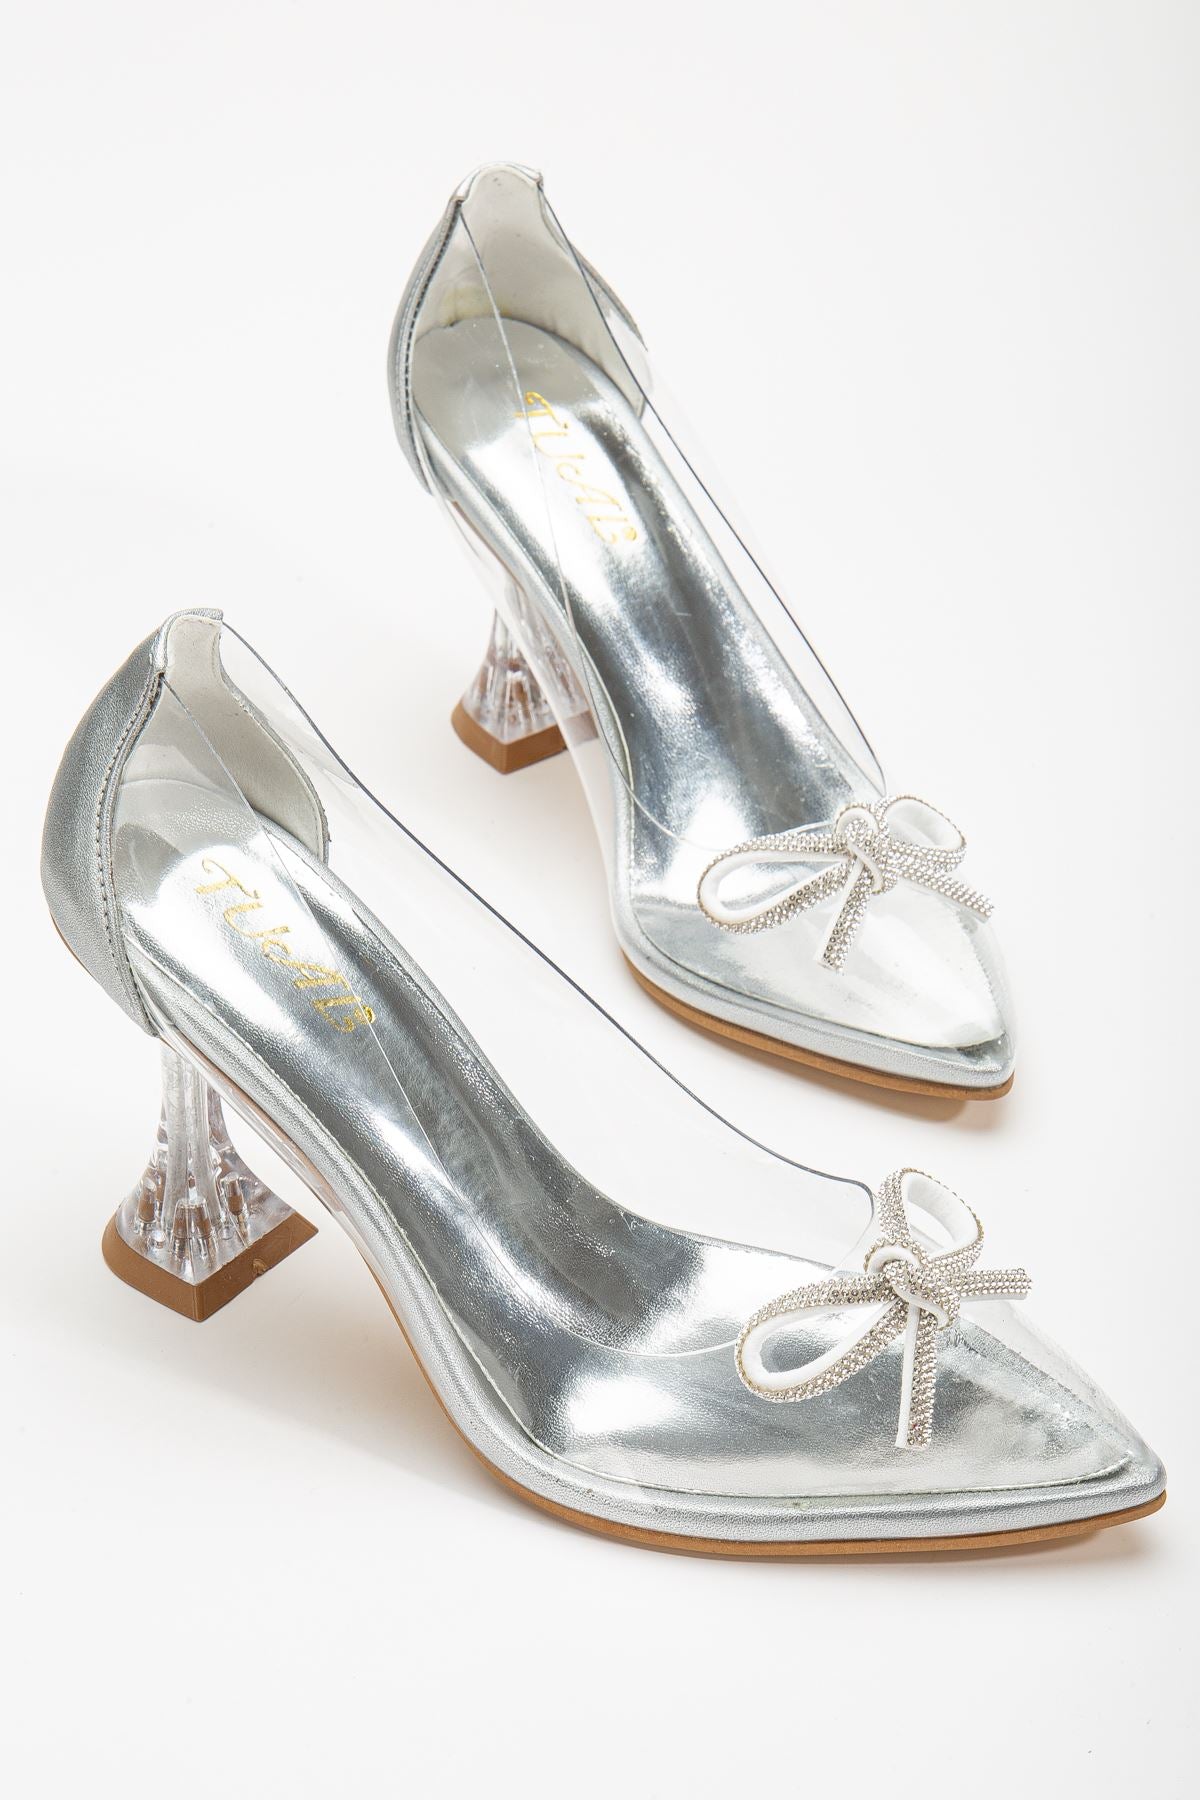 Women's Silver Stiletto Stone Transparent Heeled Shoes - STREETMODE™